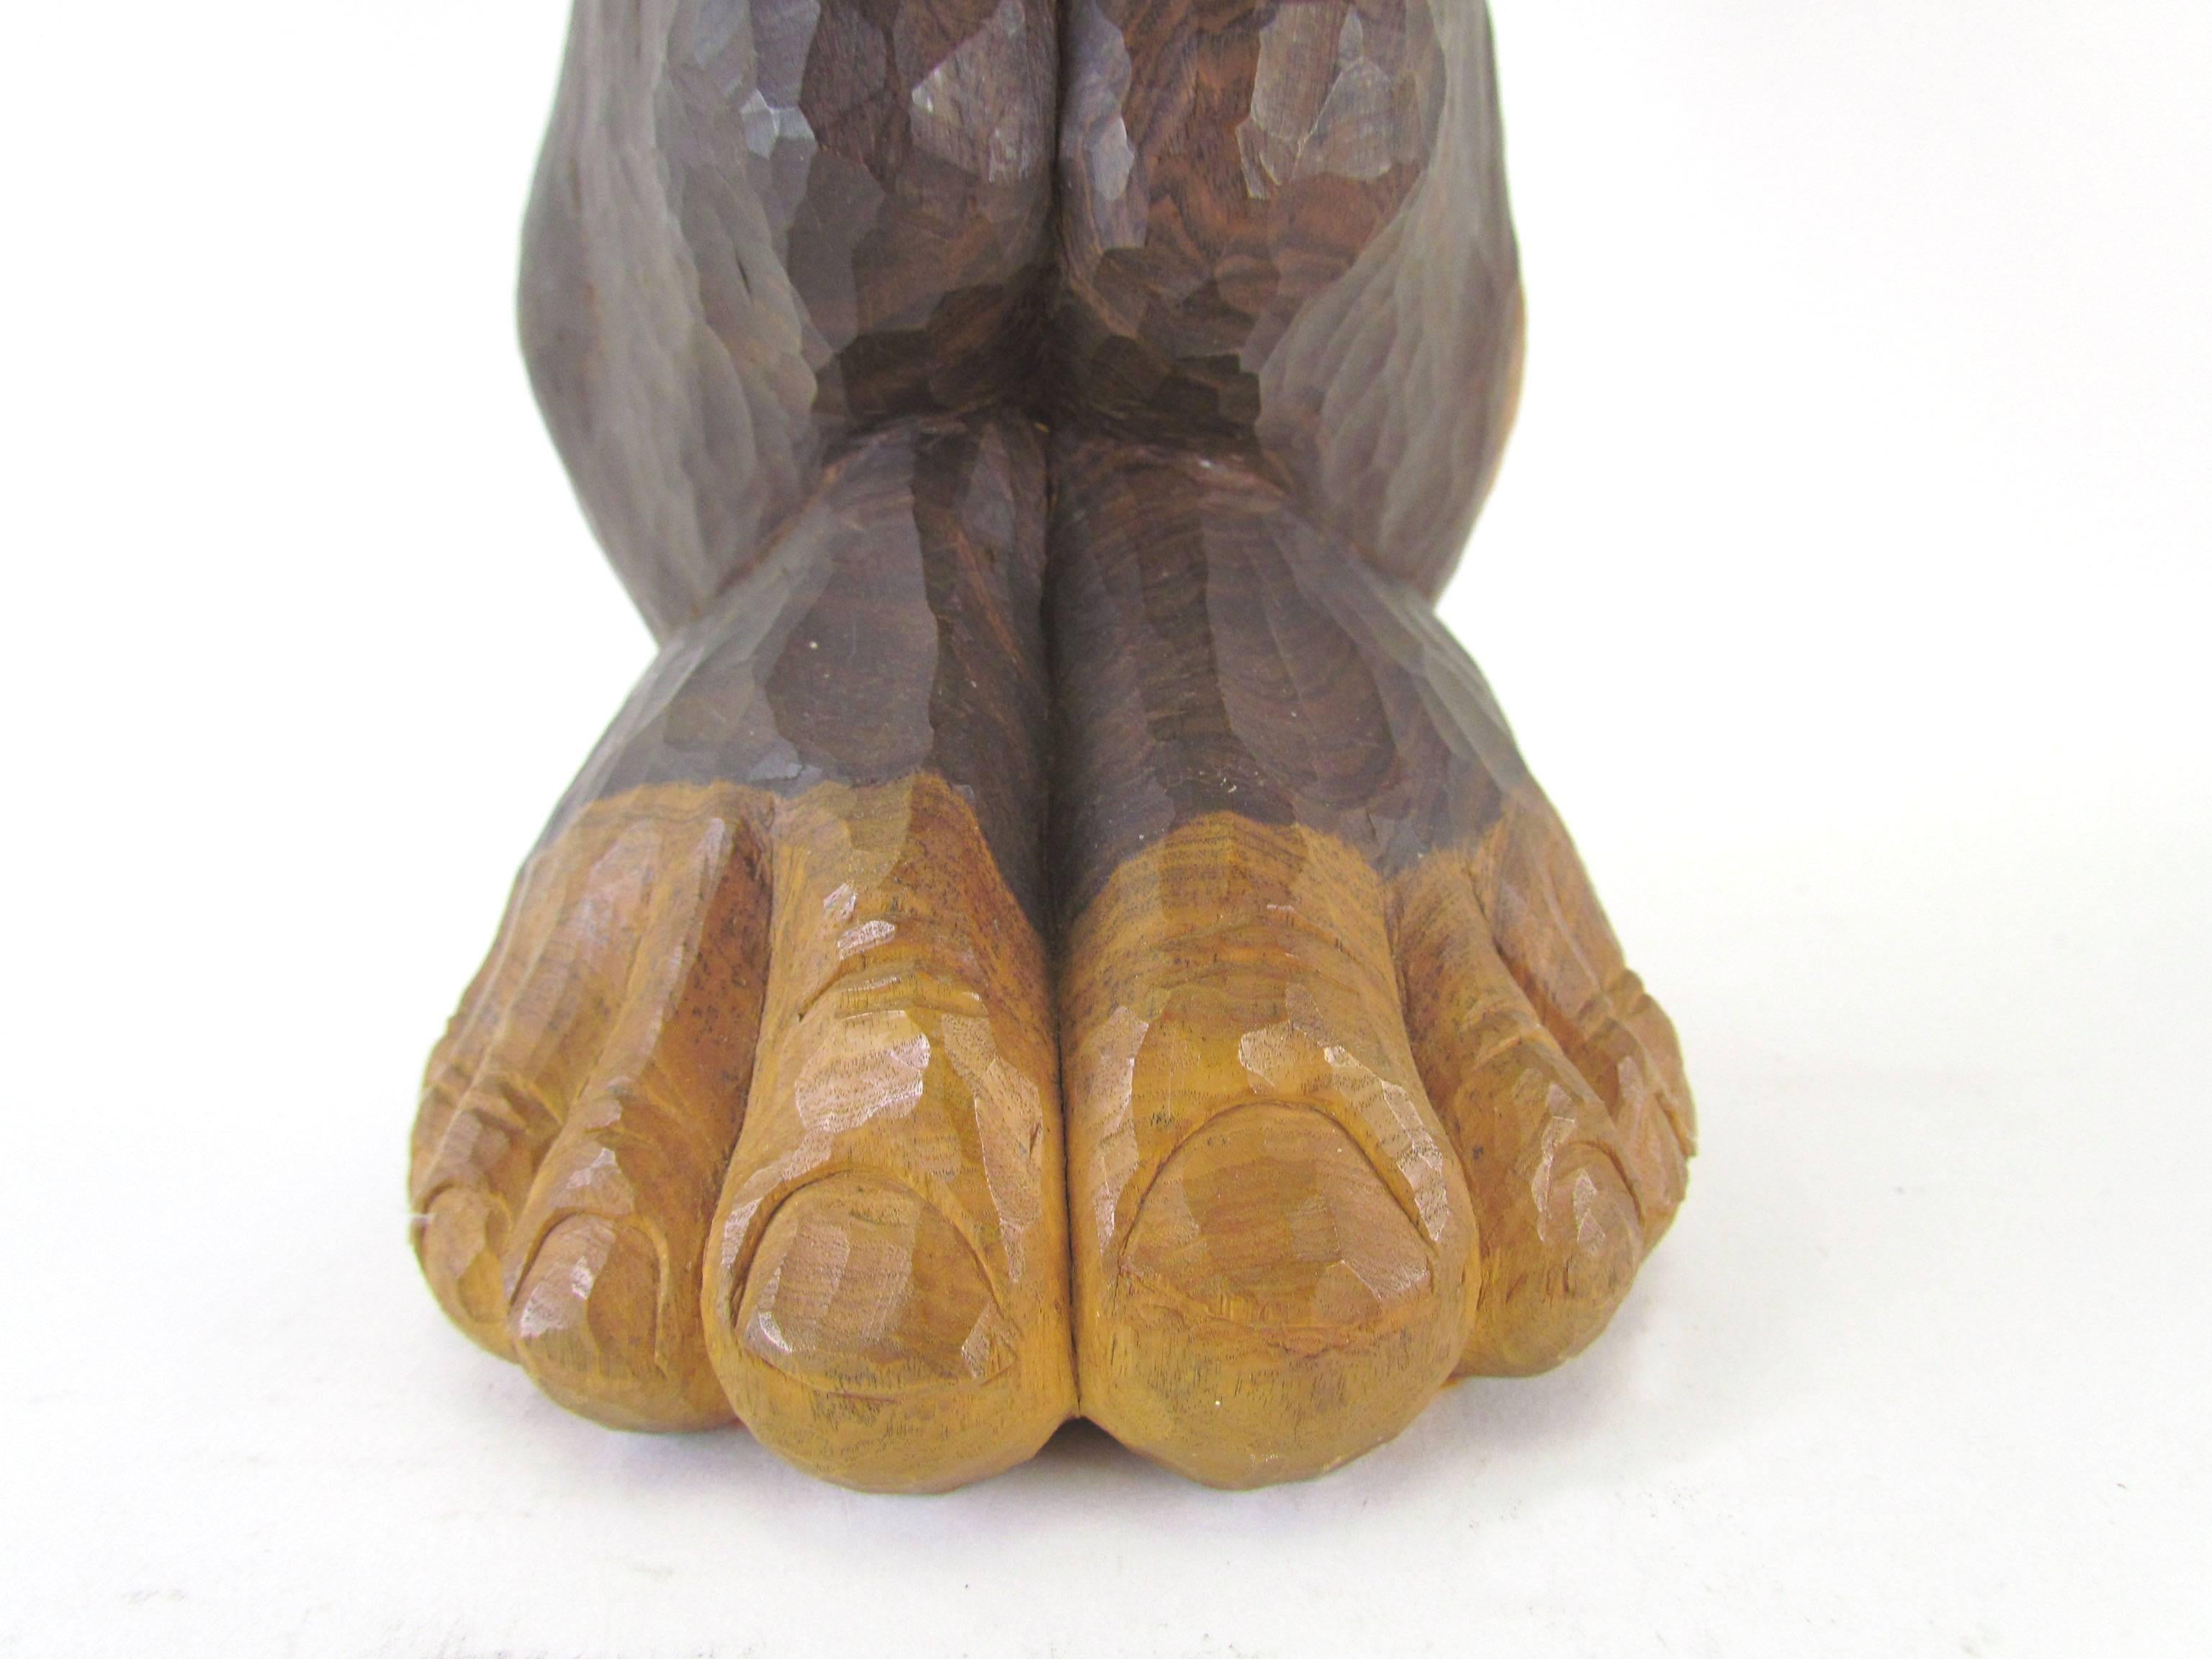 Late 20th Century Carved Wood Mid-Century Sculpture Titled “Miss Num” by Diane Derrick For Sale